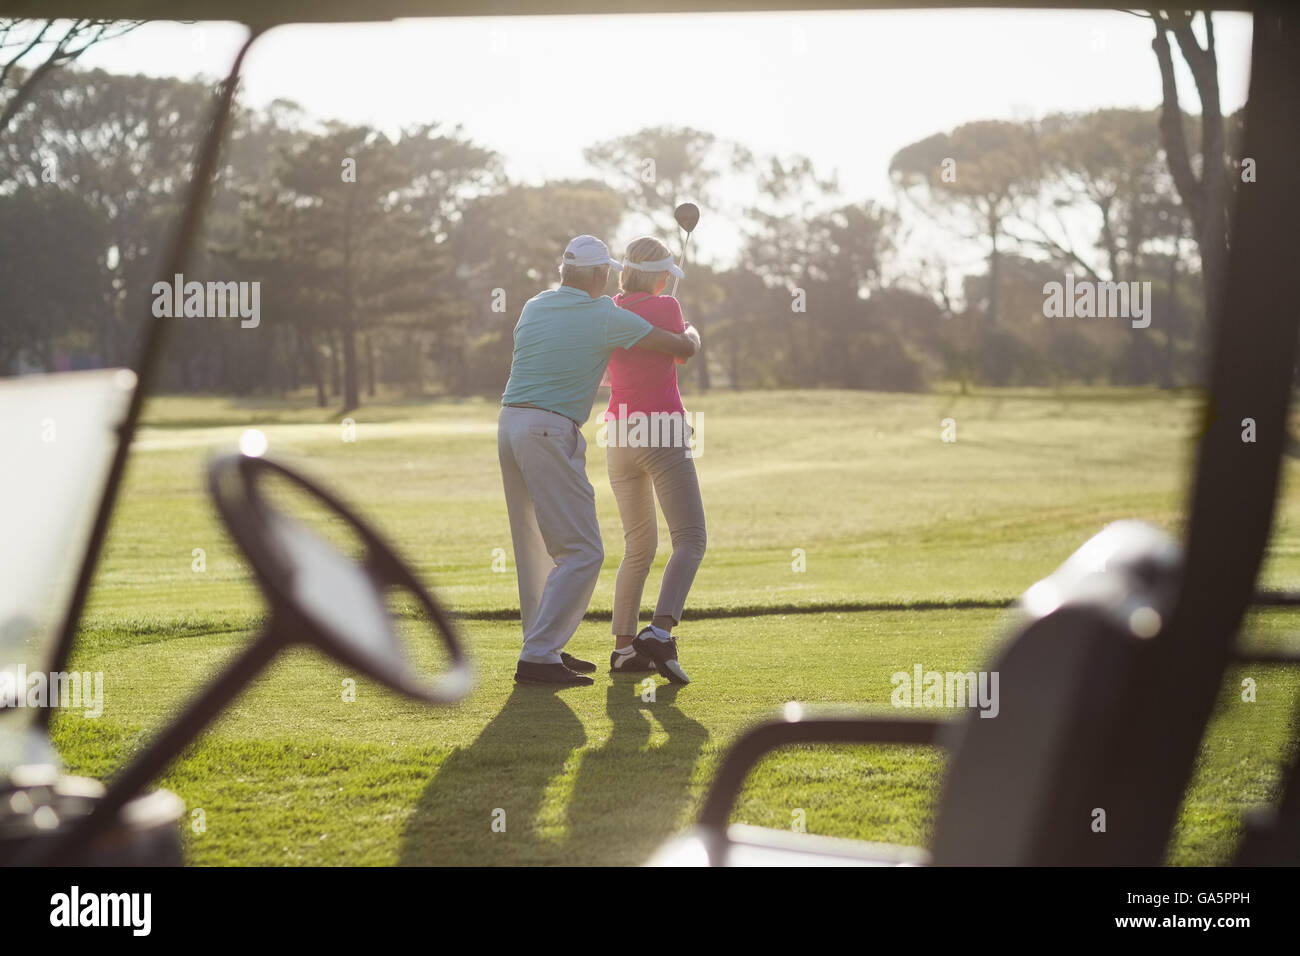 Rear view of mature man teaching woman to play golf Stock Photo